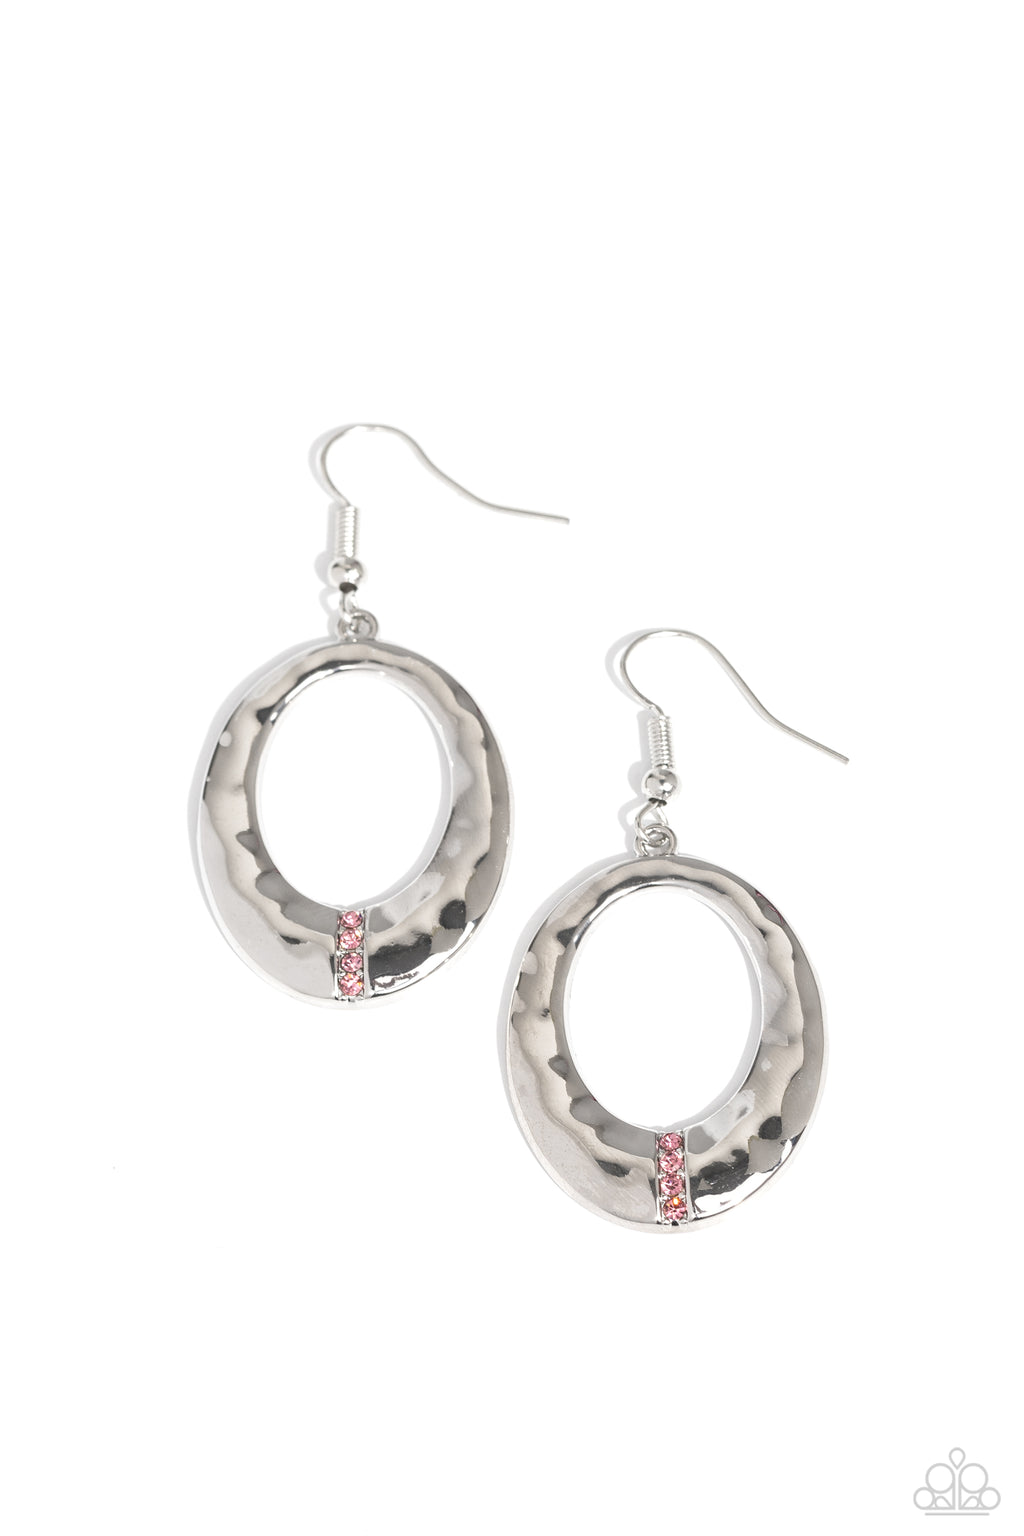 five-dollar-jewelry-center-stage-classic-pink-earrings-paparazzi-accessories